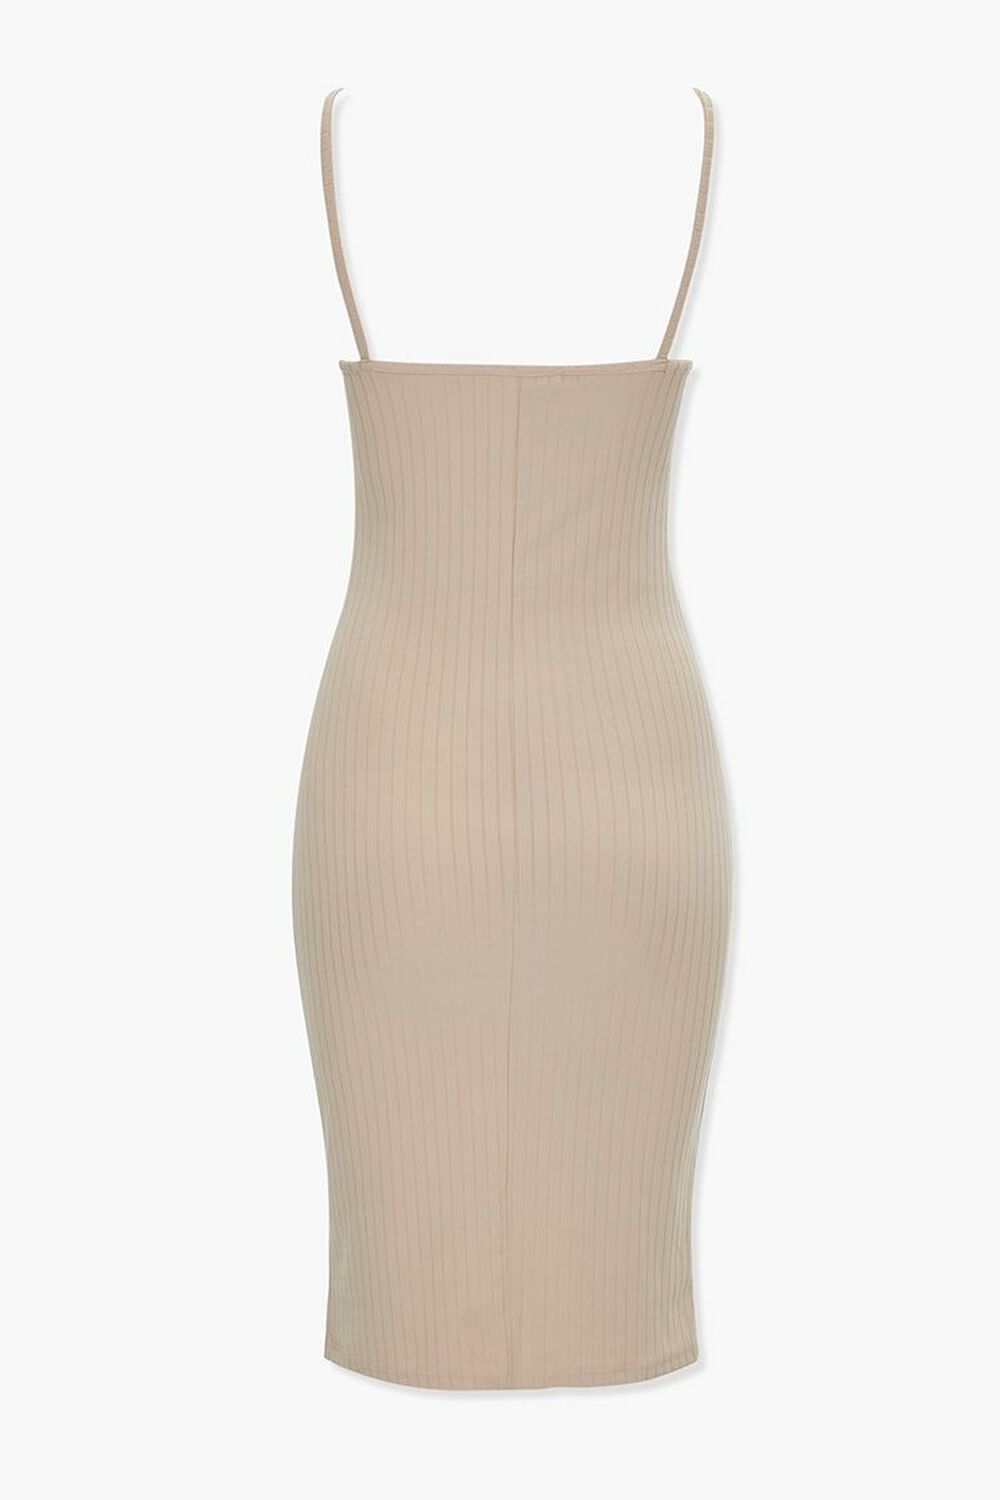 TAUPE Ribbed Bodycon Dress, image 3